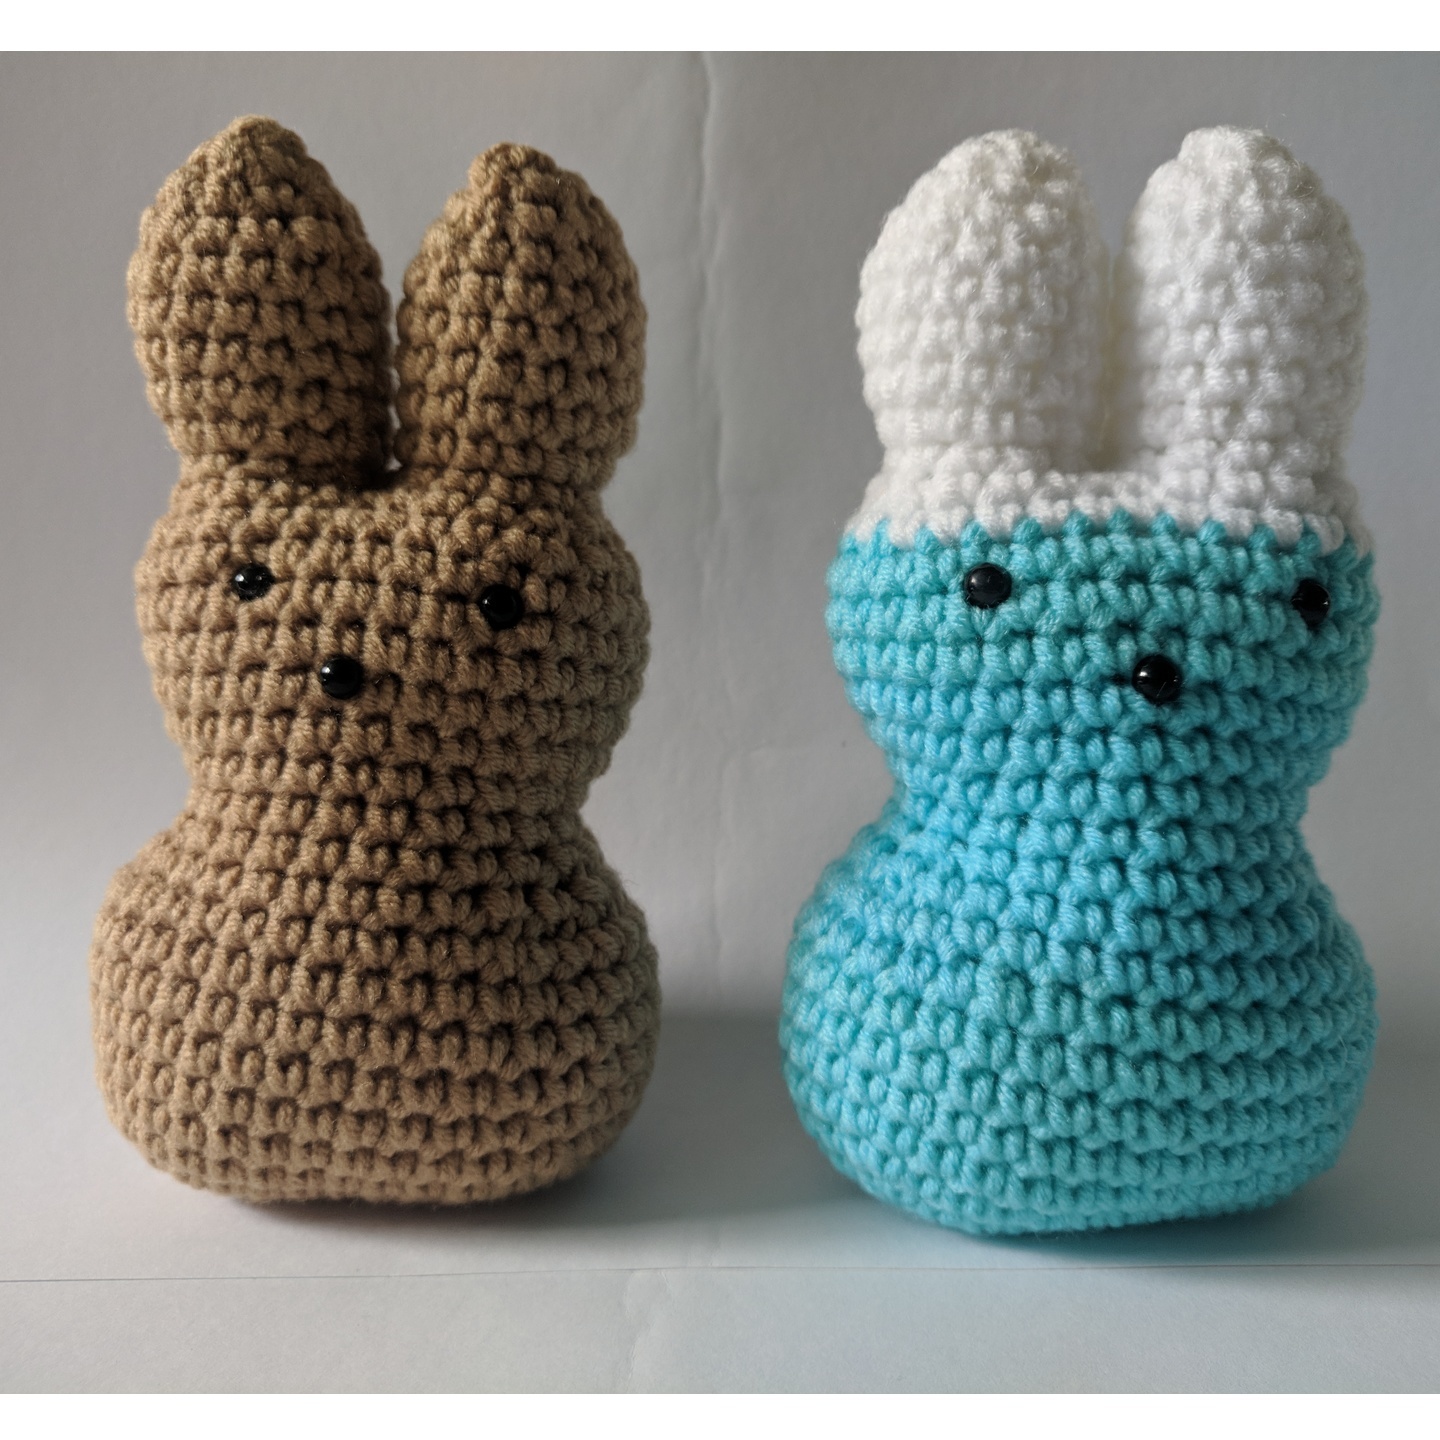 Assorted Crocheted Bunnies, Large